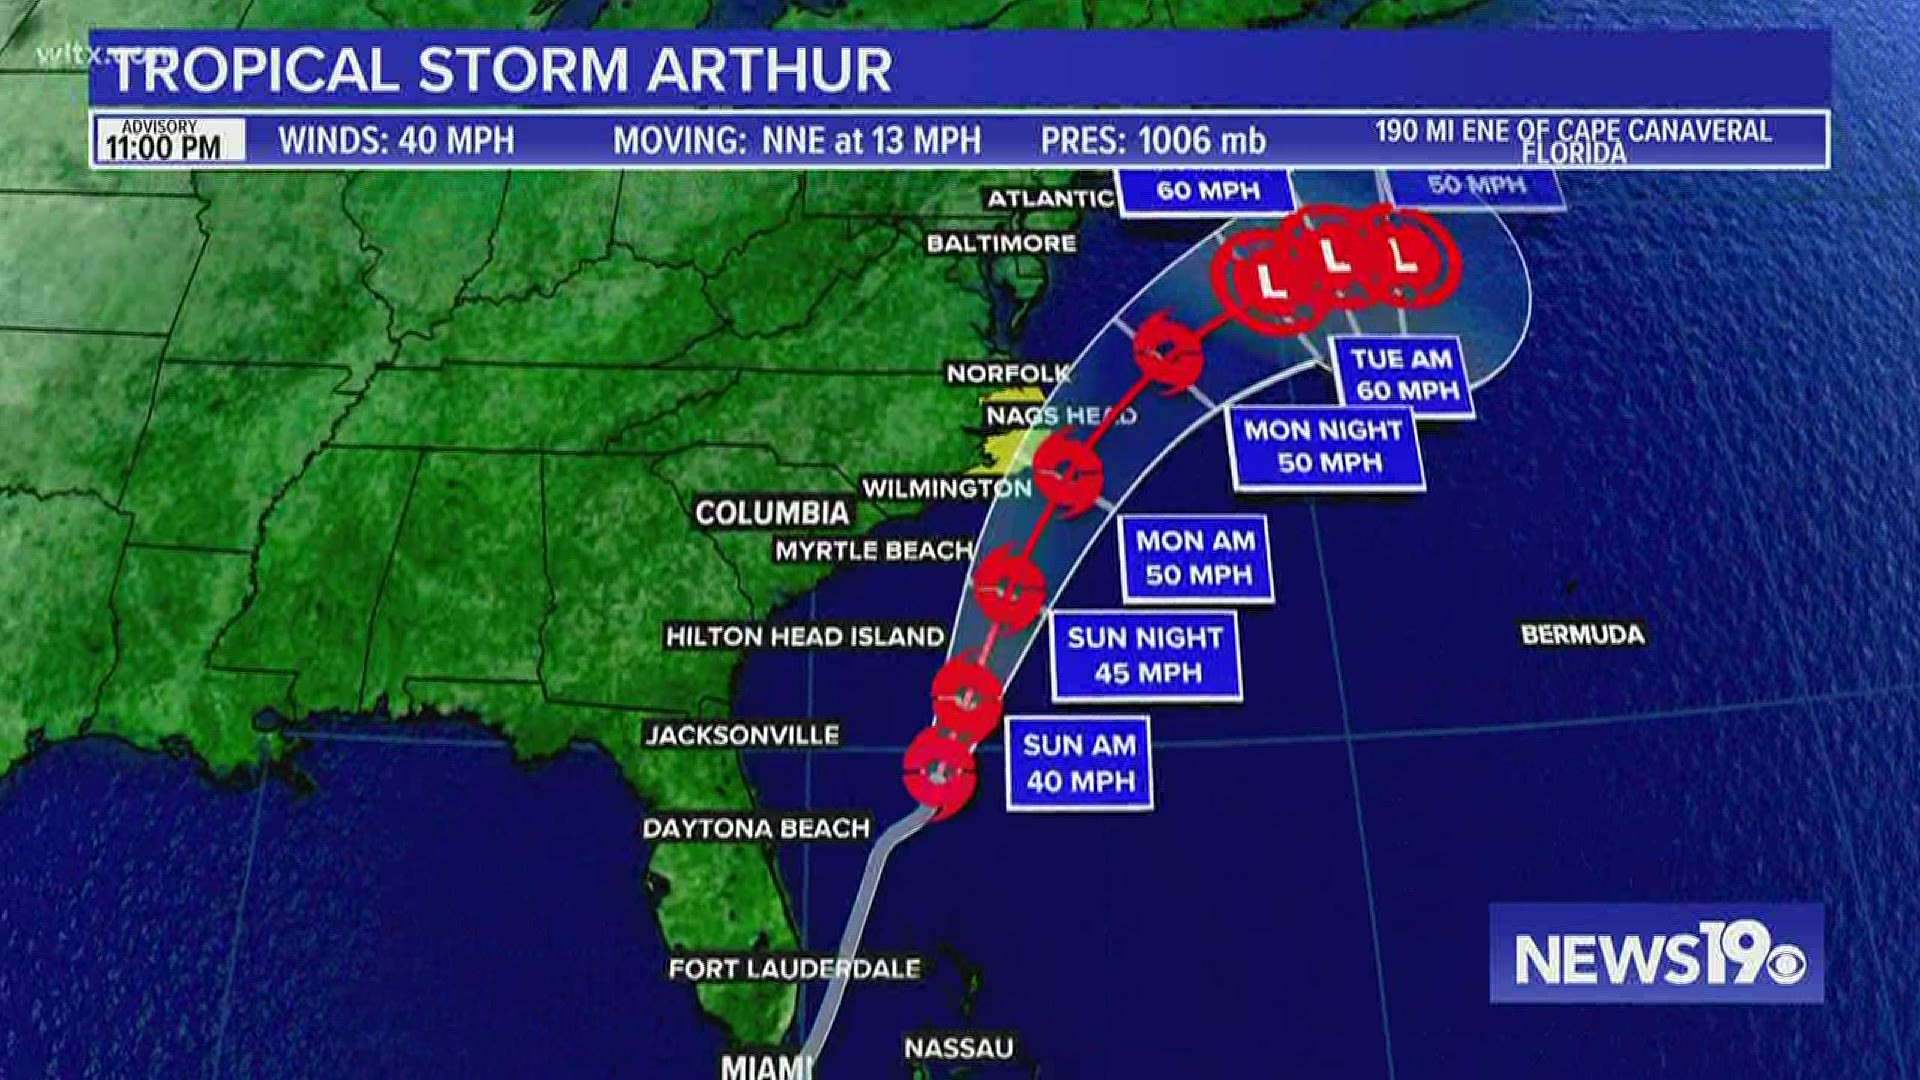 The 2020 Atlantic Storm season doesn't begin until June 1, but already there's there's the first named storm. Tropical Storm Arthur came into being Saturday night.